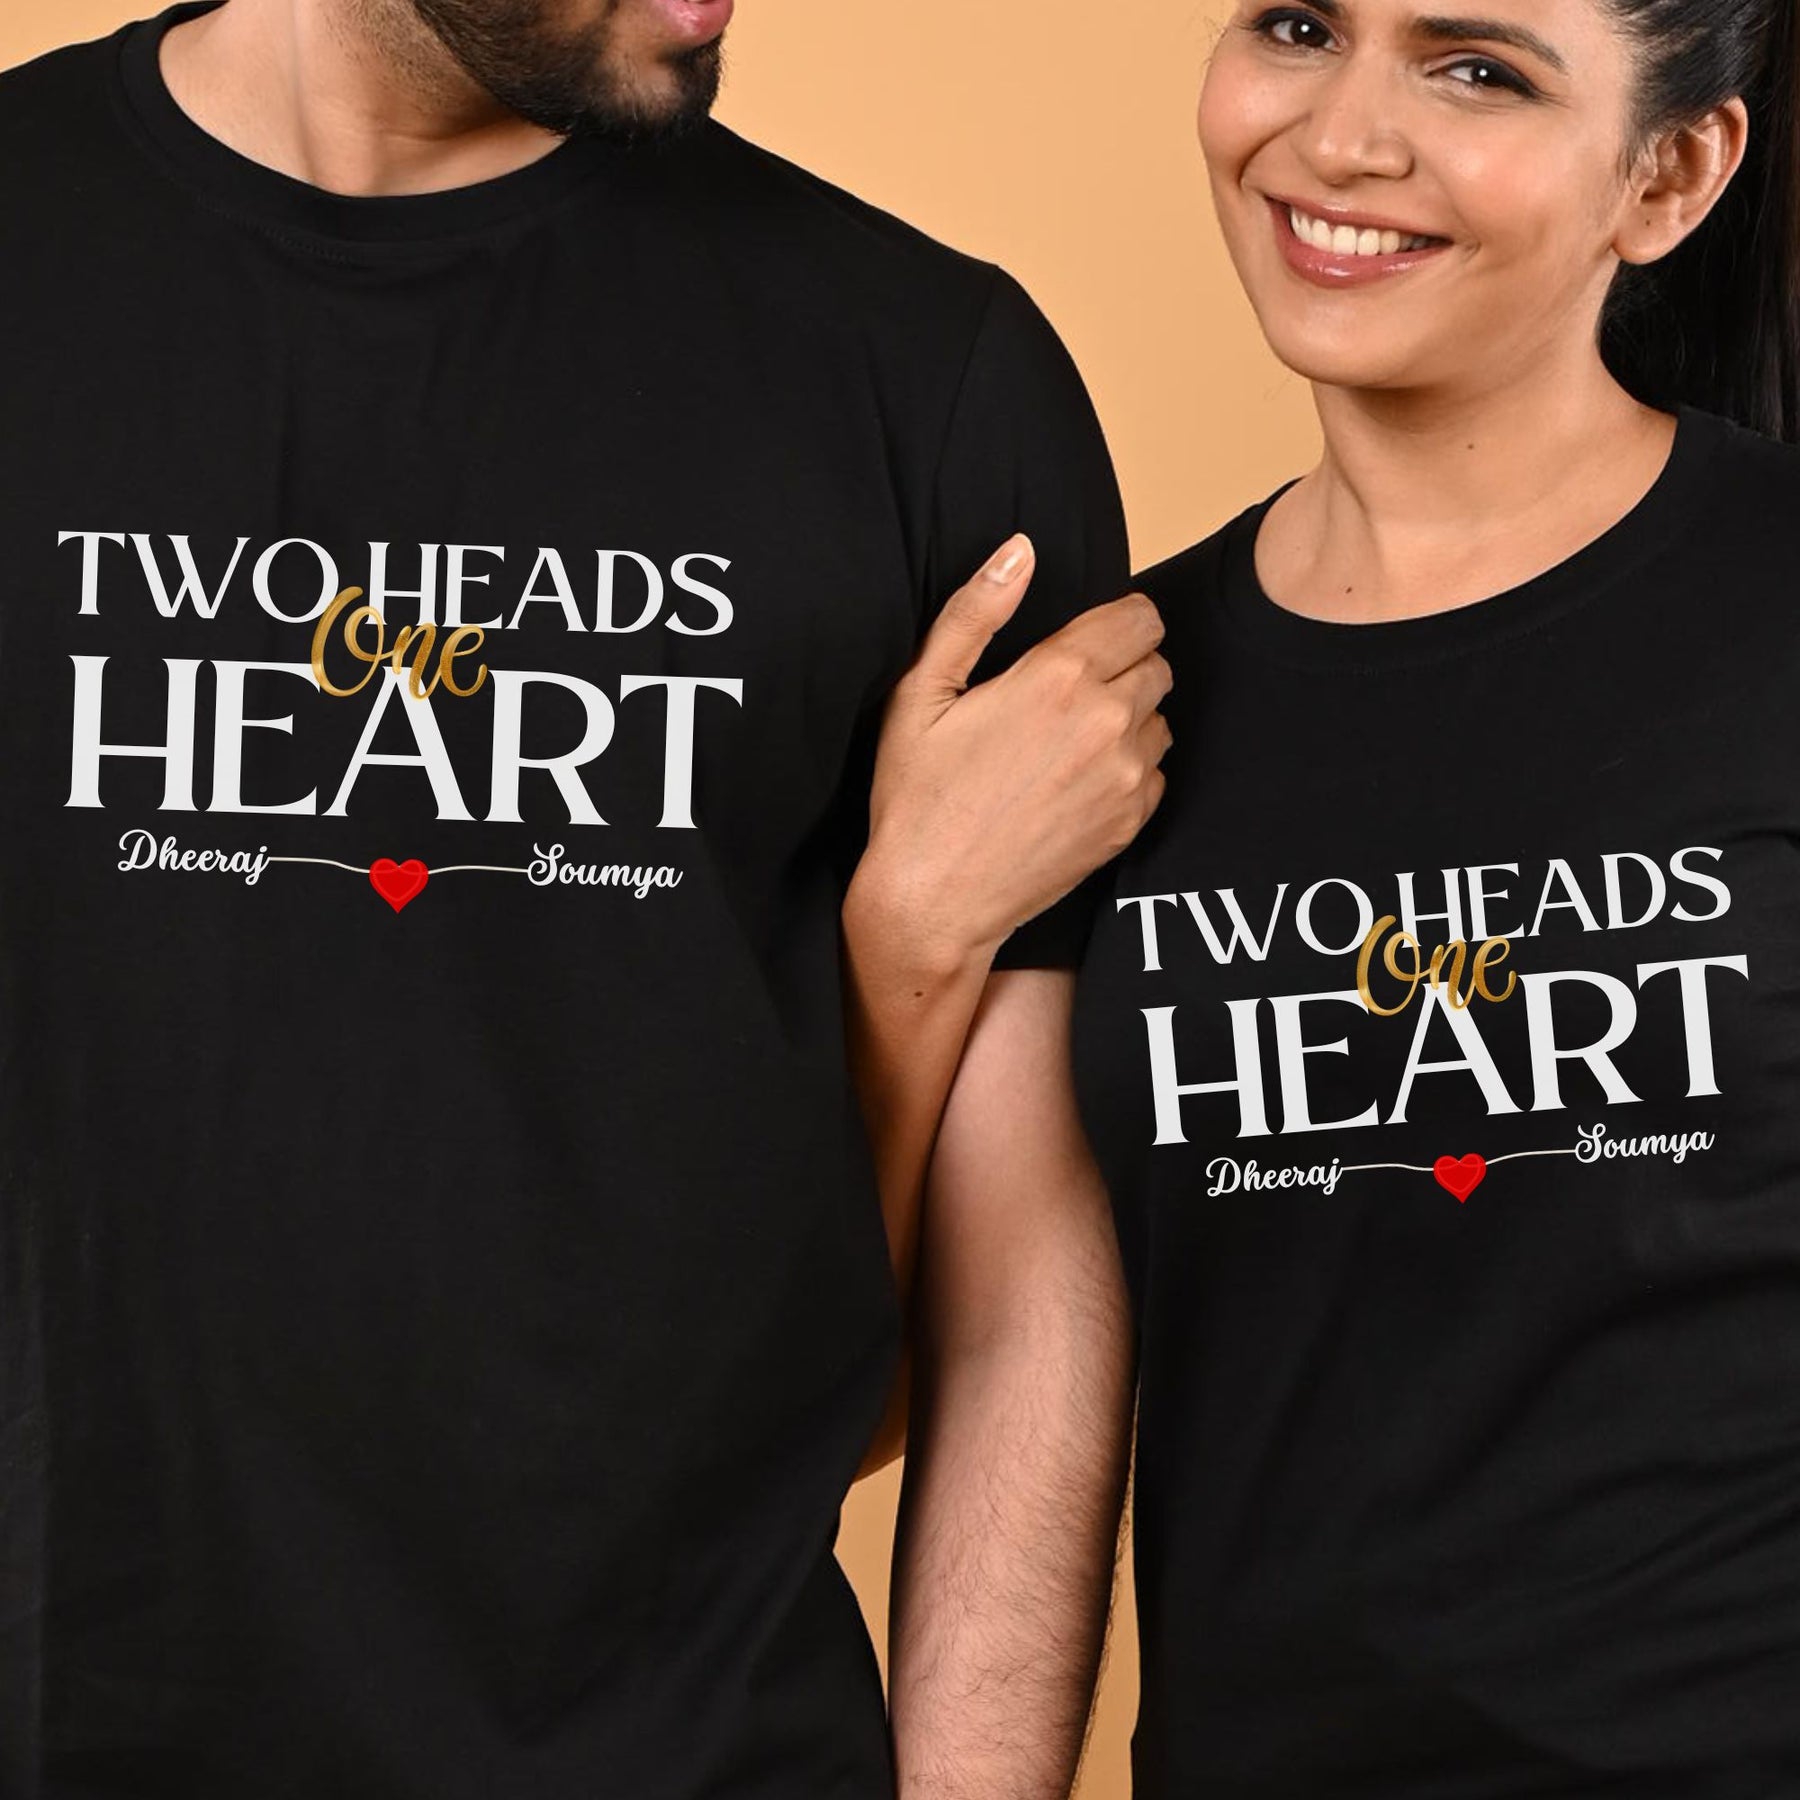 personalized-two-heads-one-heart-black-cotton-couple-tshirts-gogirgit-com